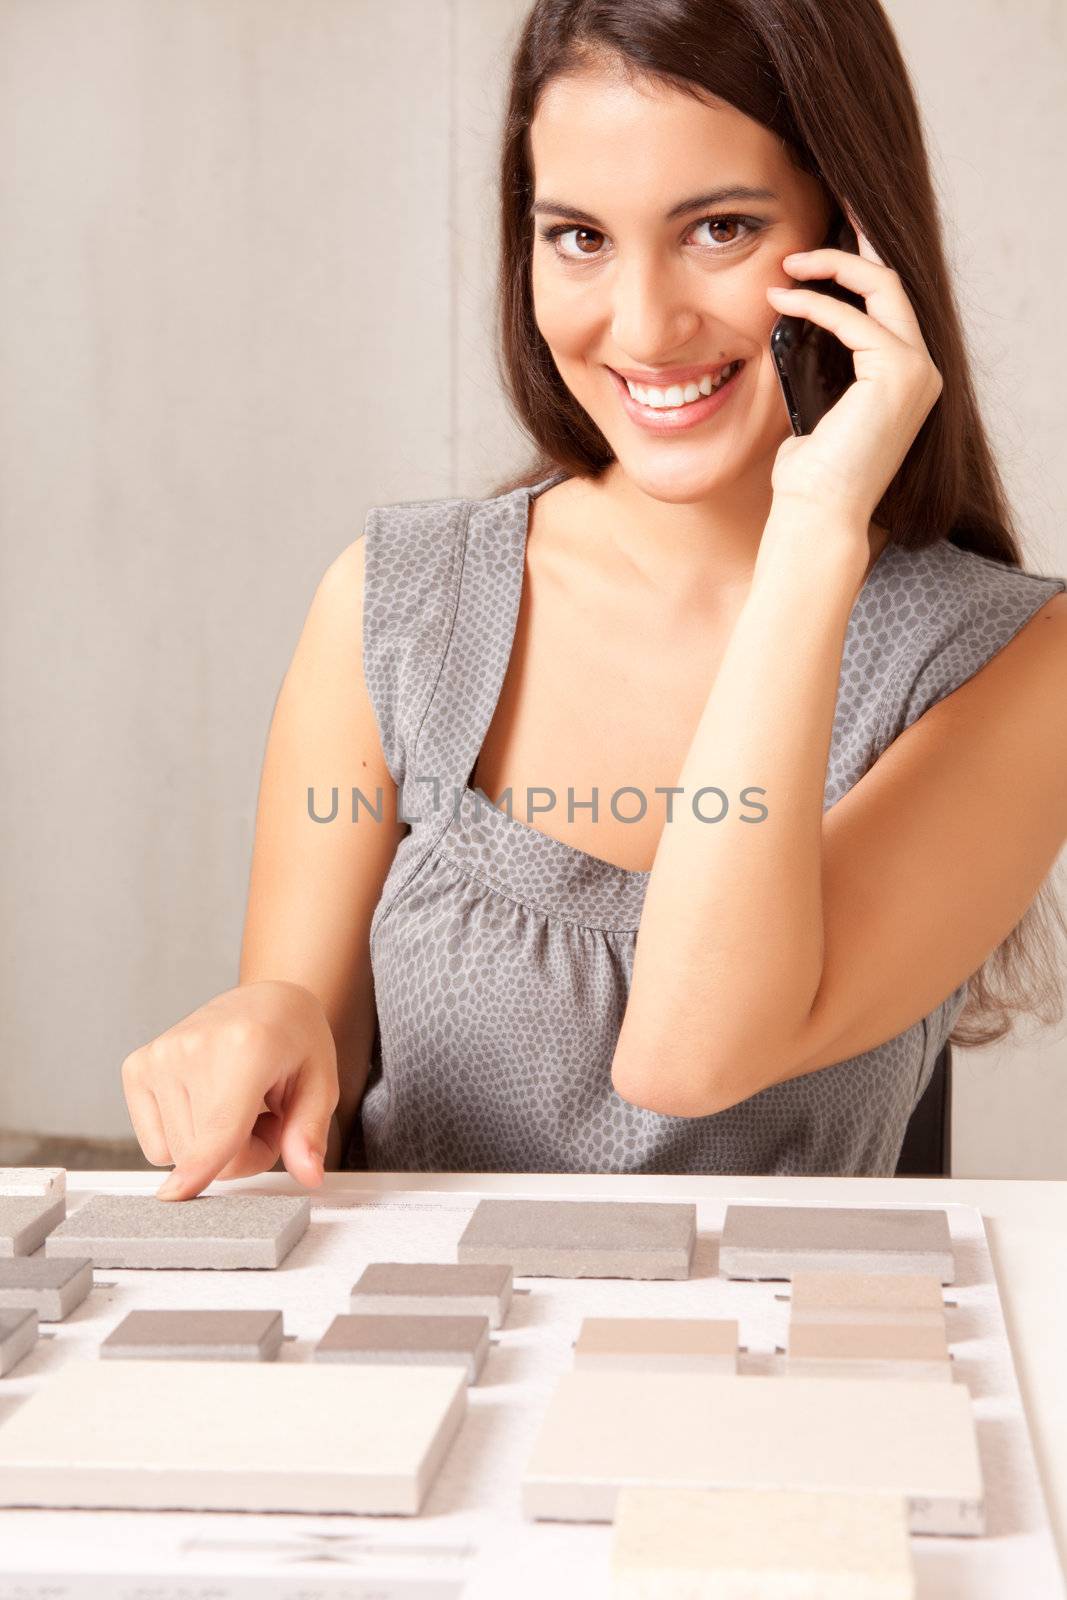 A designer talking on the phone choosing a stone tile